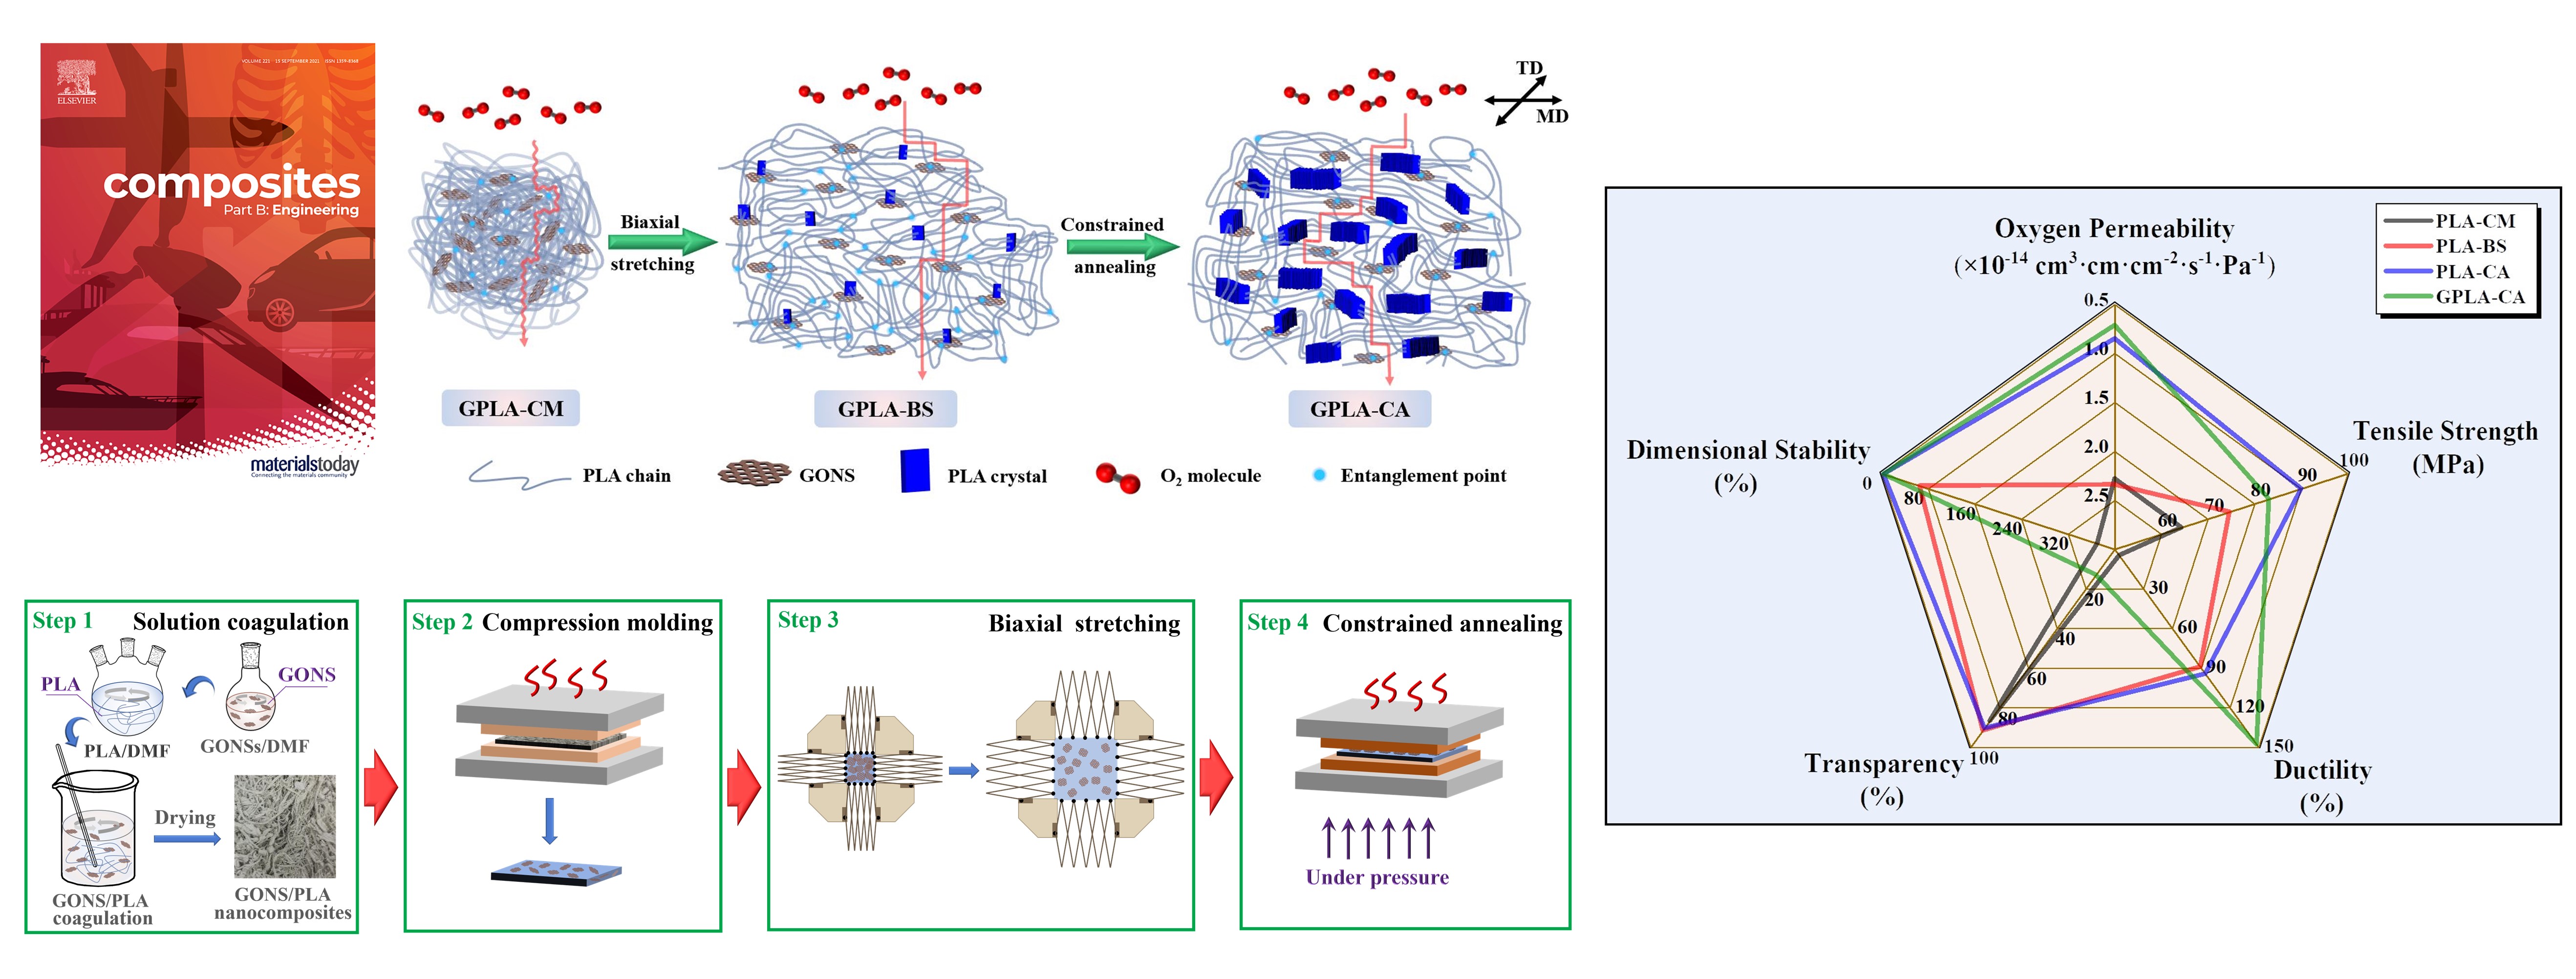 Constructing robust chain entanglement network, well-defined nanosized crystals and highly aligned graphene oxide nanosheets: Towards strong, ductile and high barrier Poly(lactic acid) nanocomposite films for green packaging